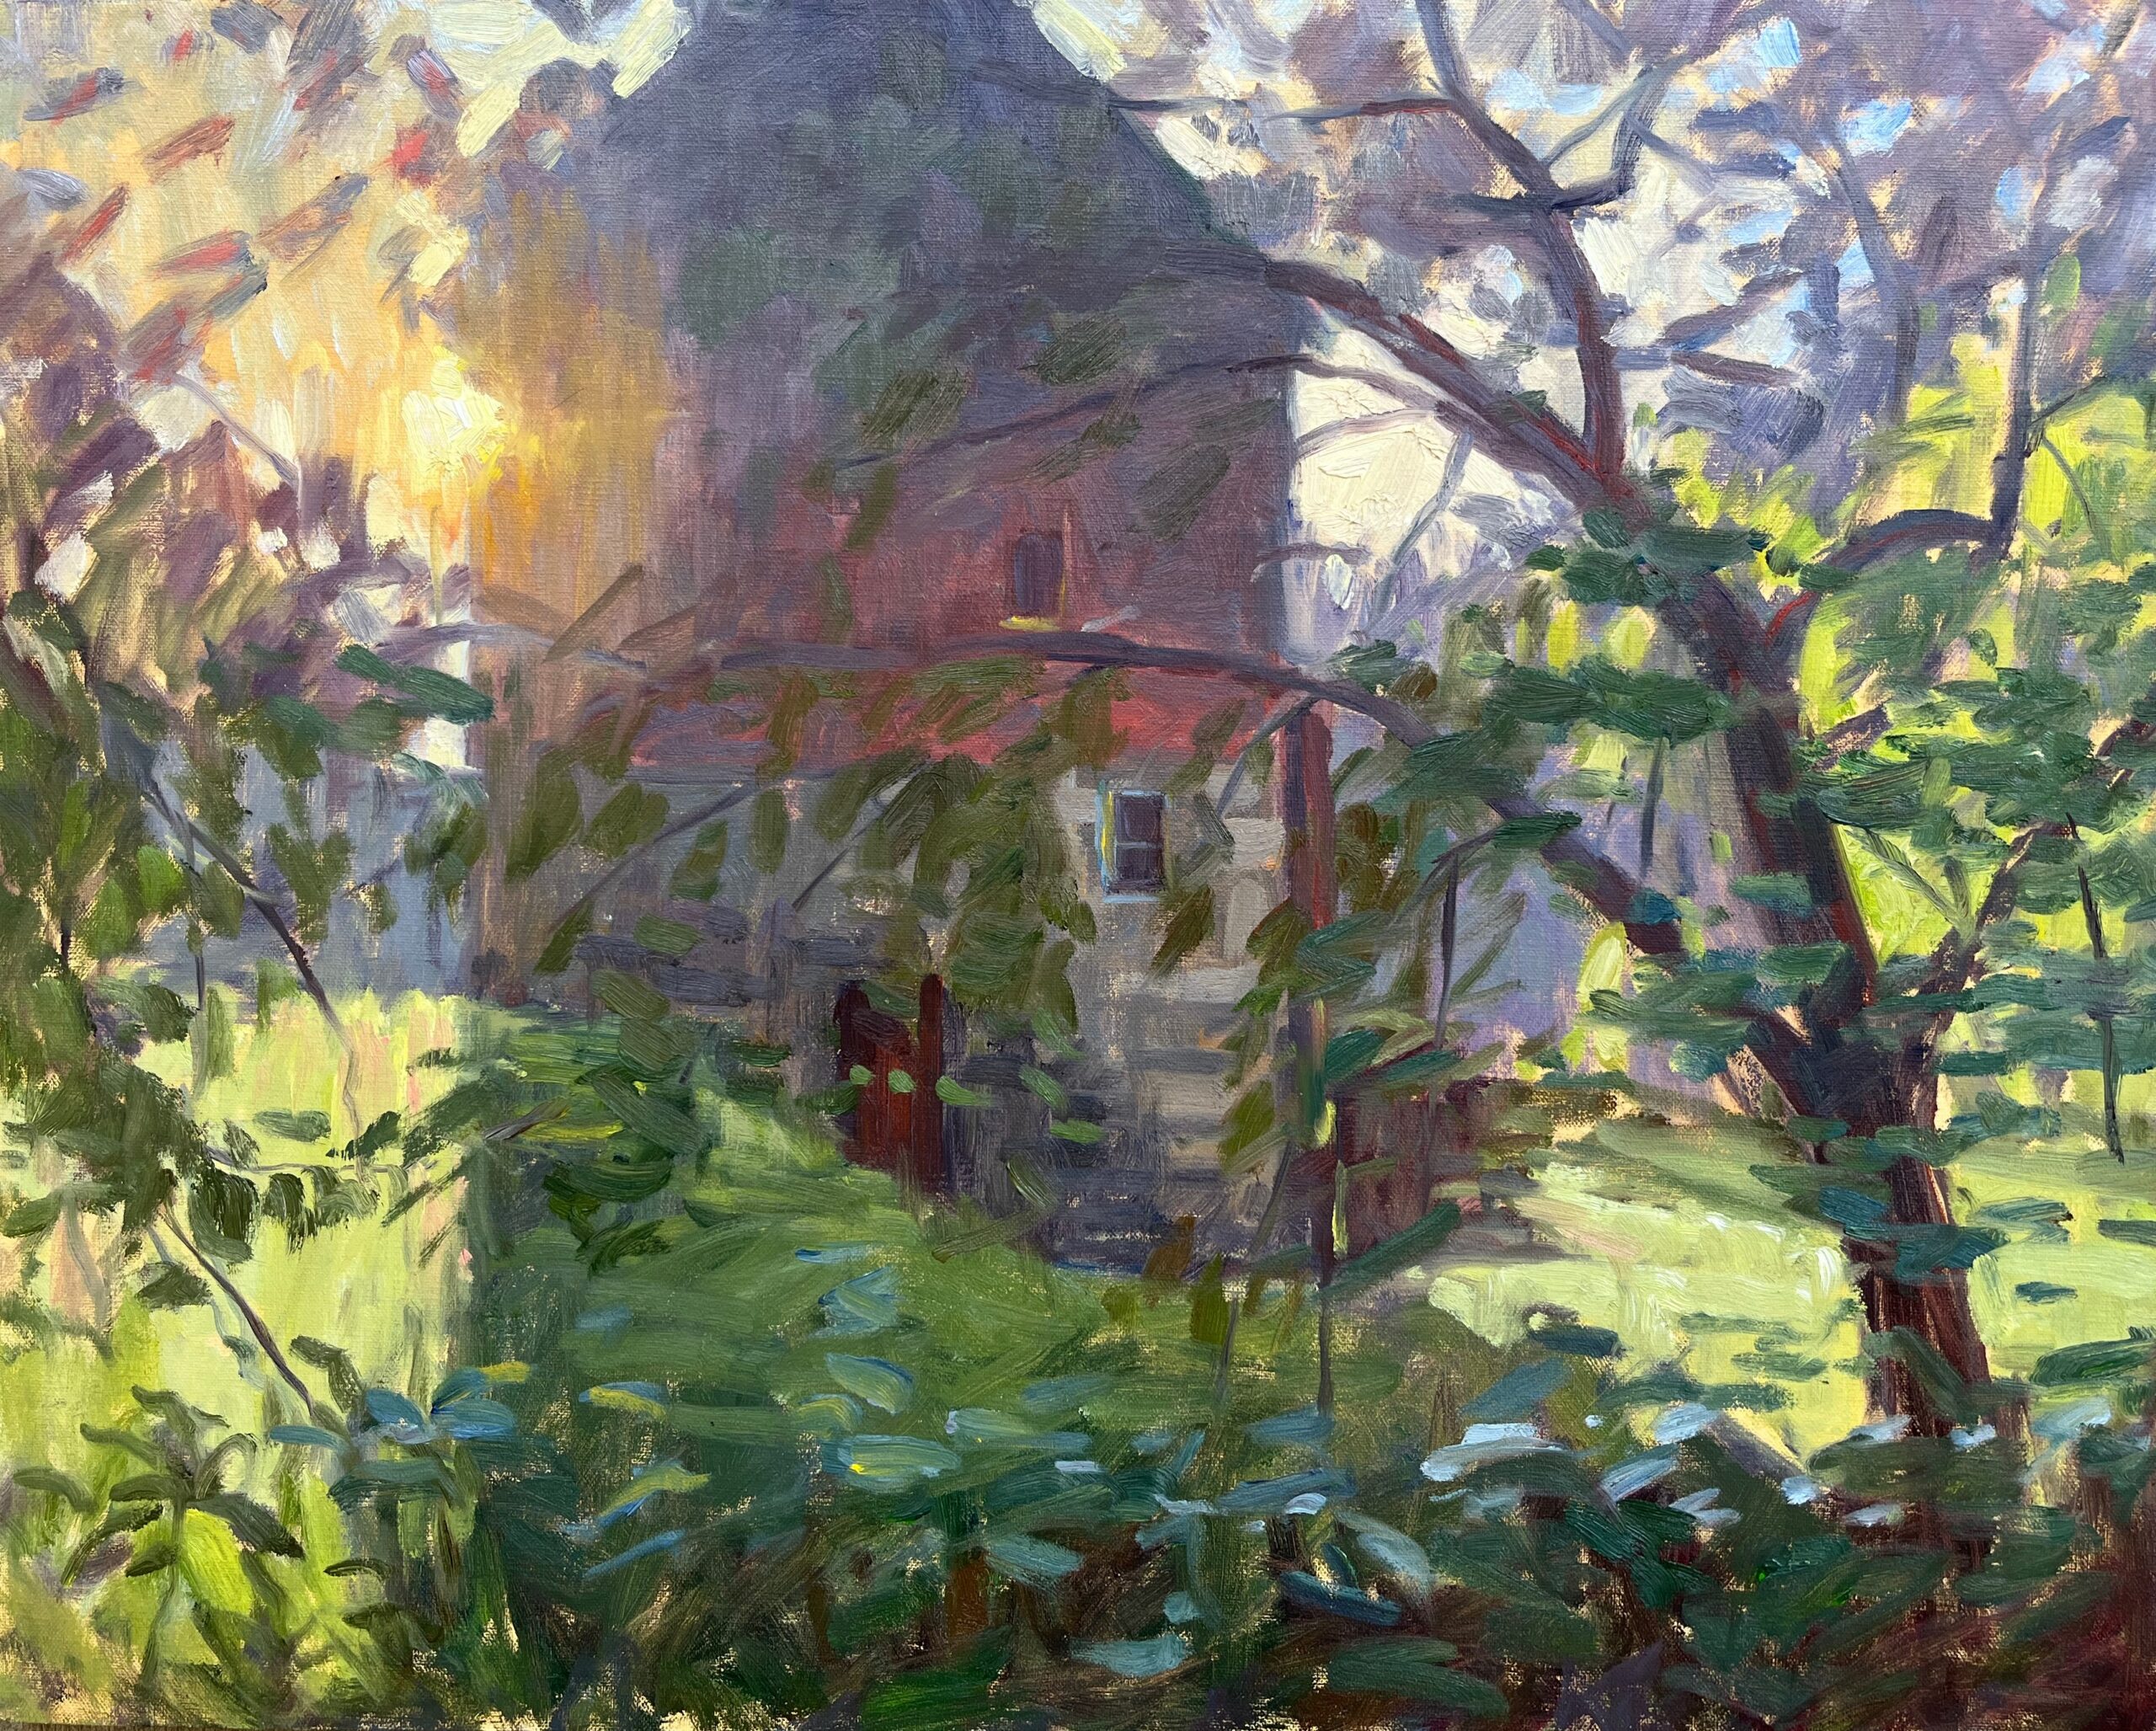 Alison Barry, "Morning at the Mill," 2022, oil, 16 x 20 in., Available from the artist, Plein air